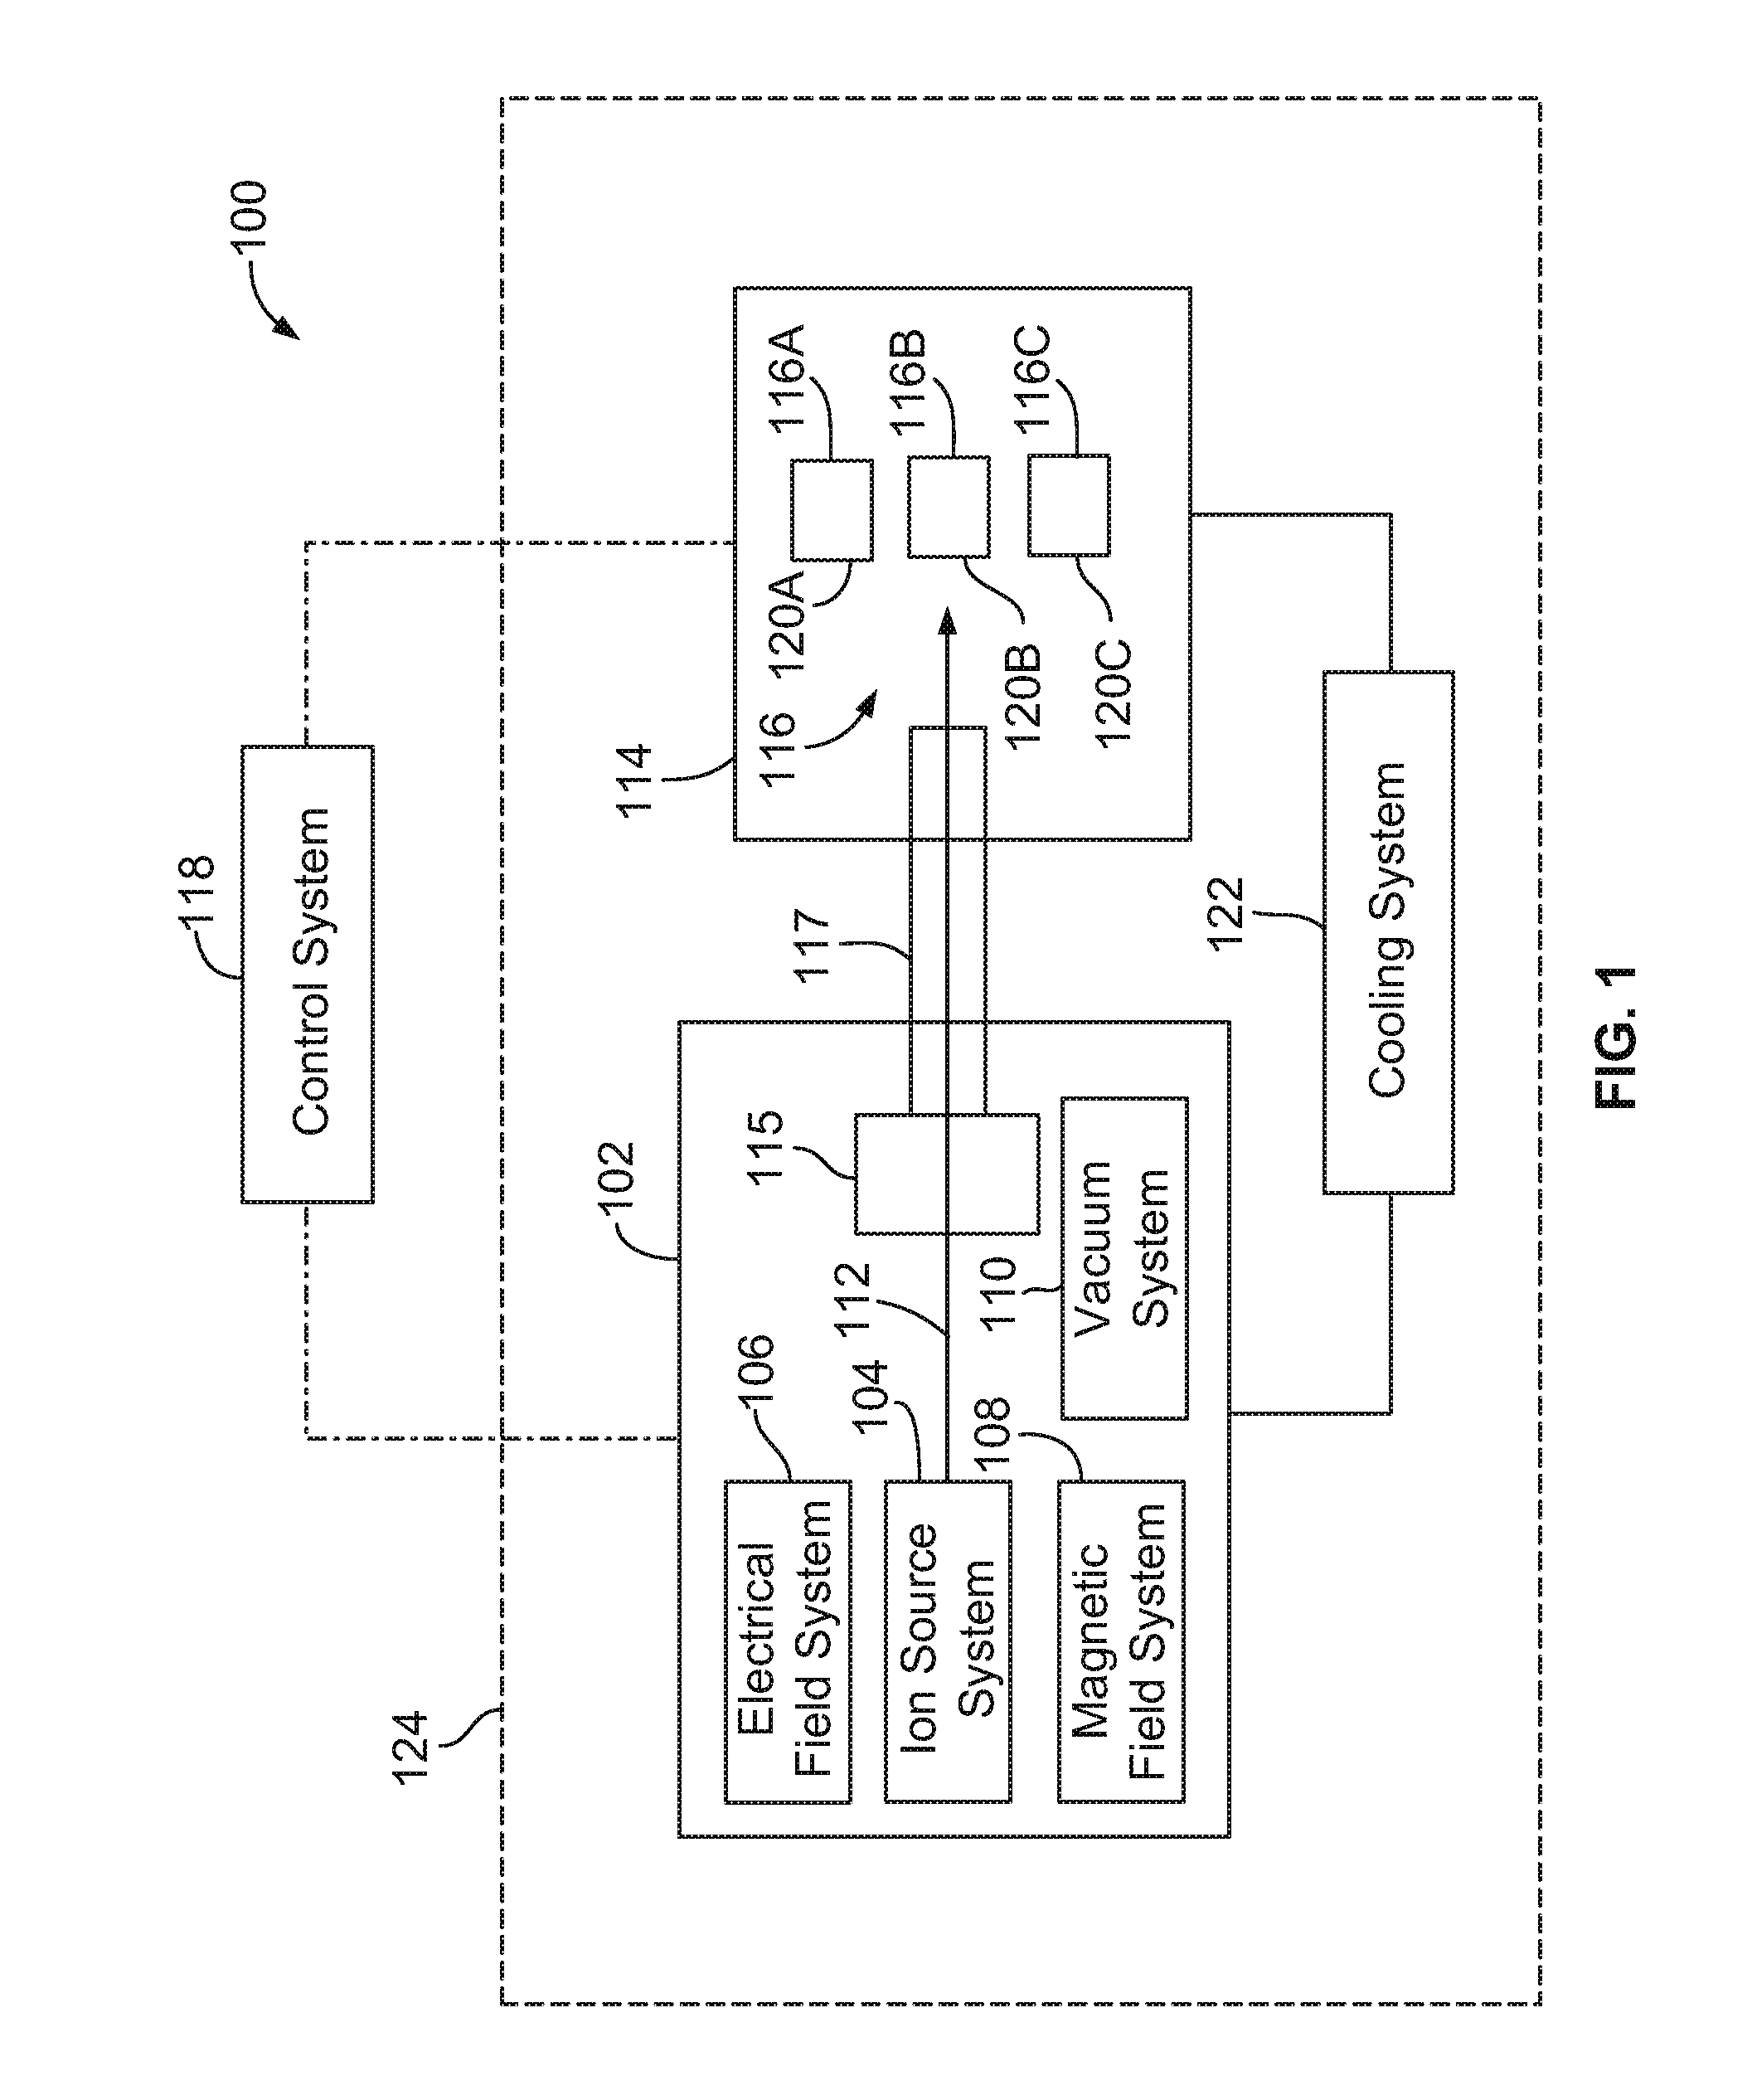 Isotope production system and cyclotron having a magnet yoke with a pump acceptance cavity